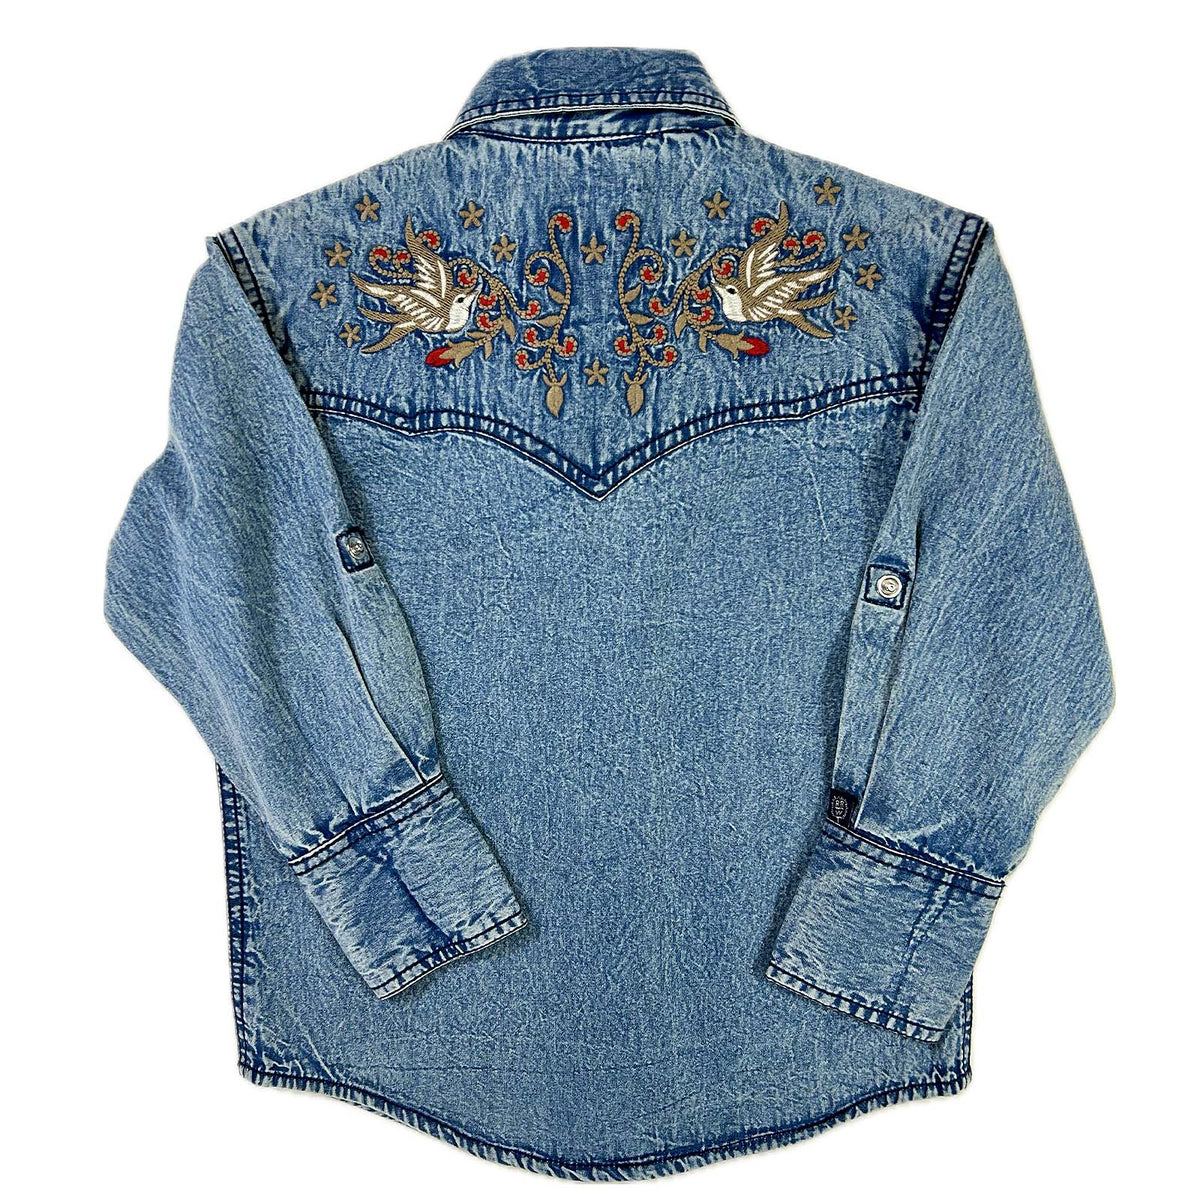 Kid's Flying Swallows Embroidered Denim Western Shirt